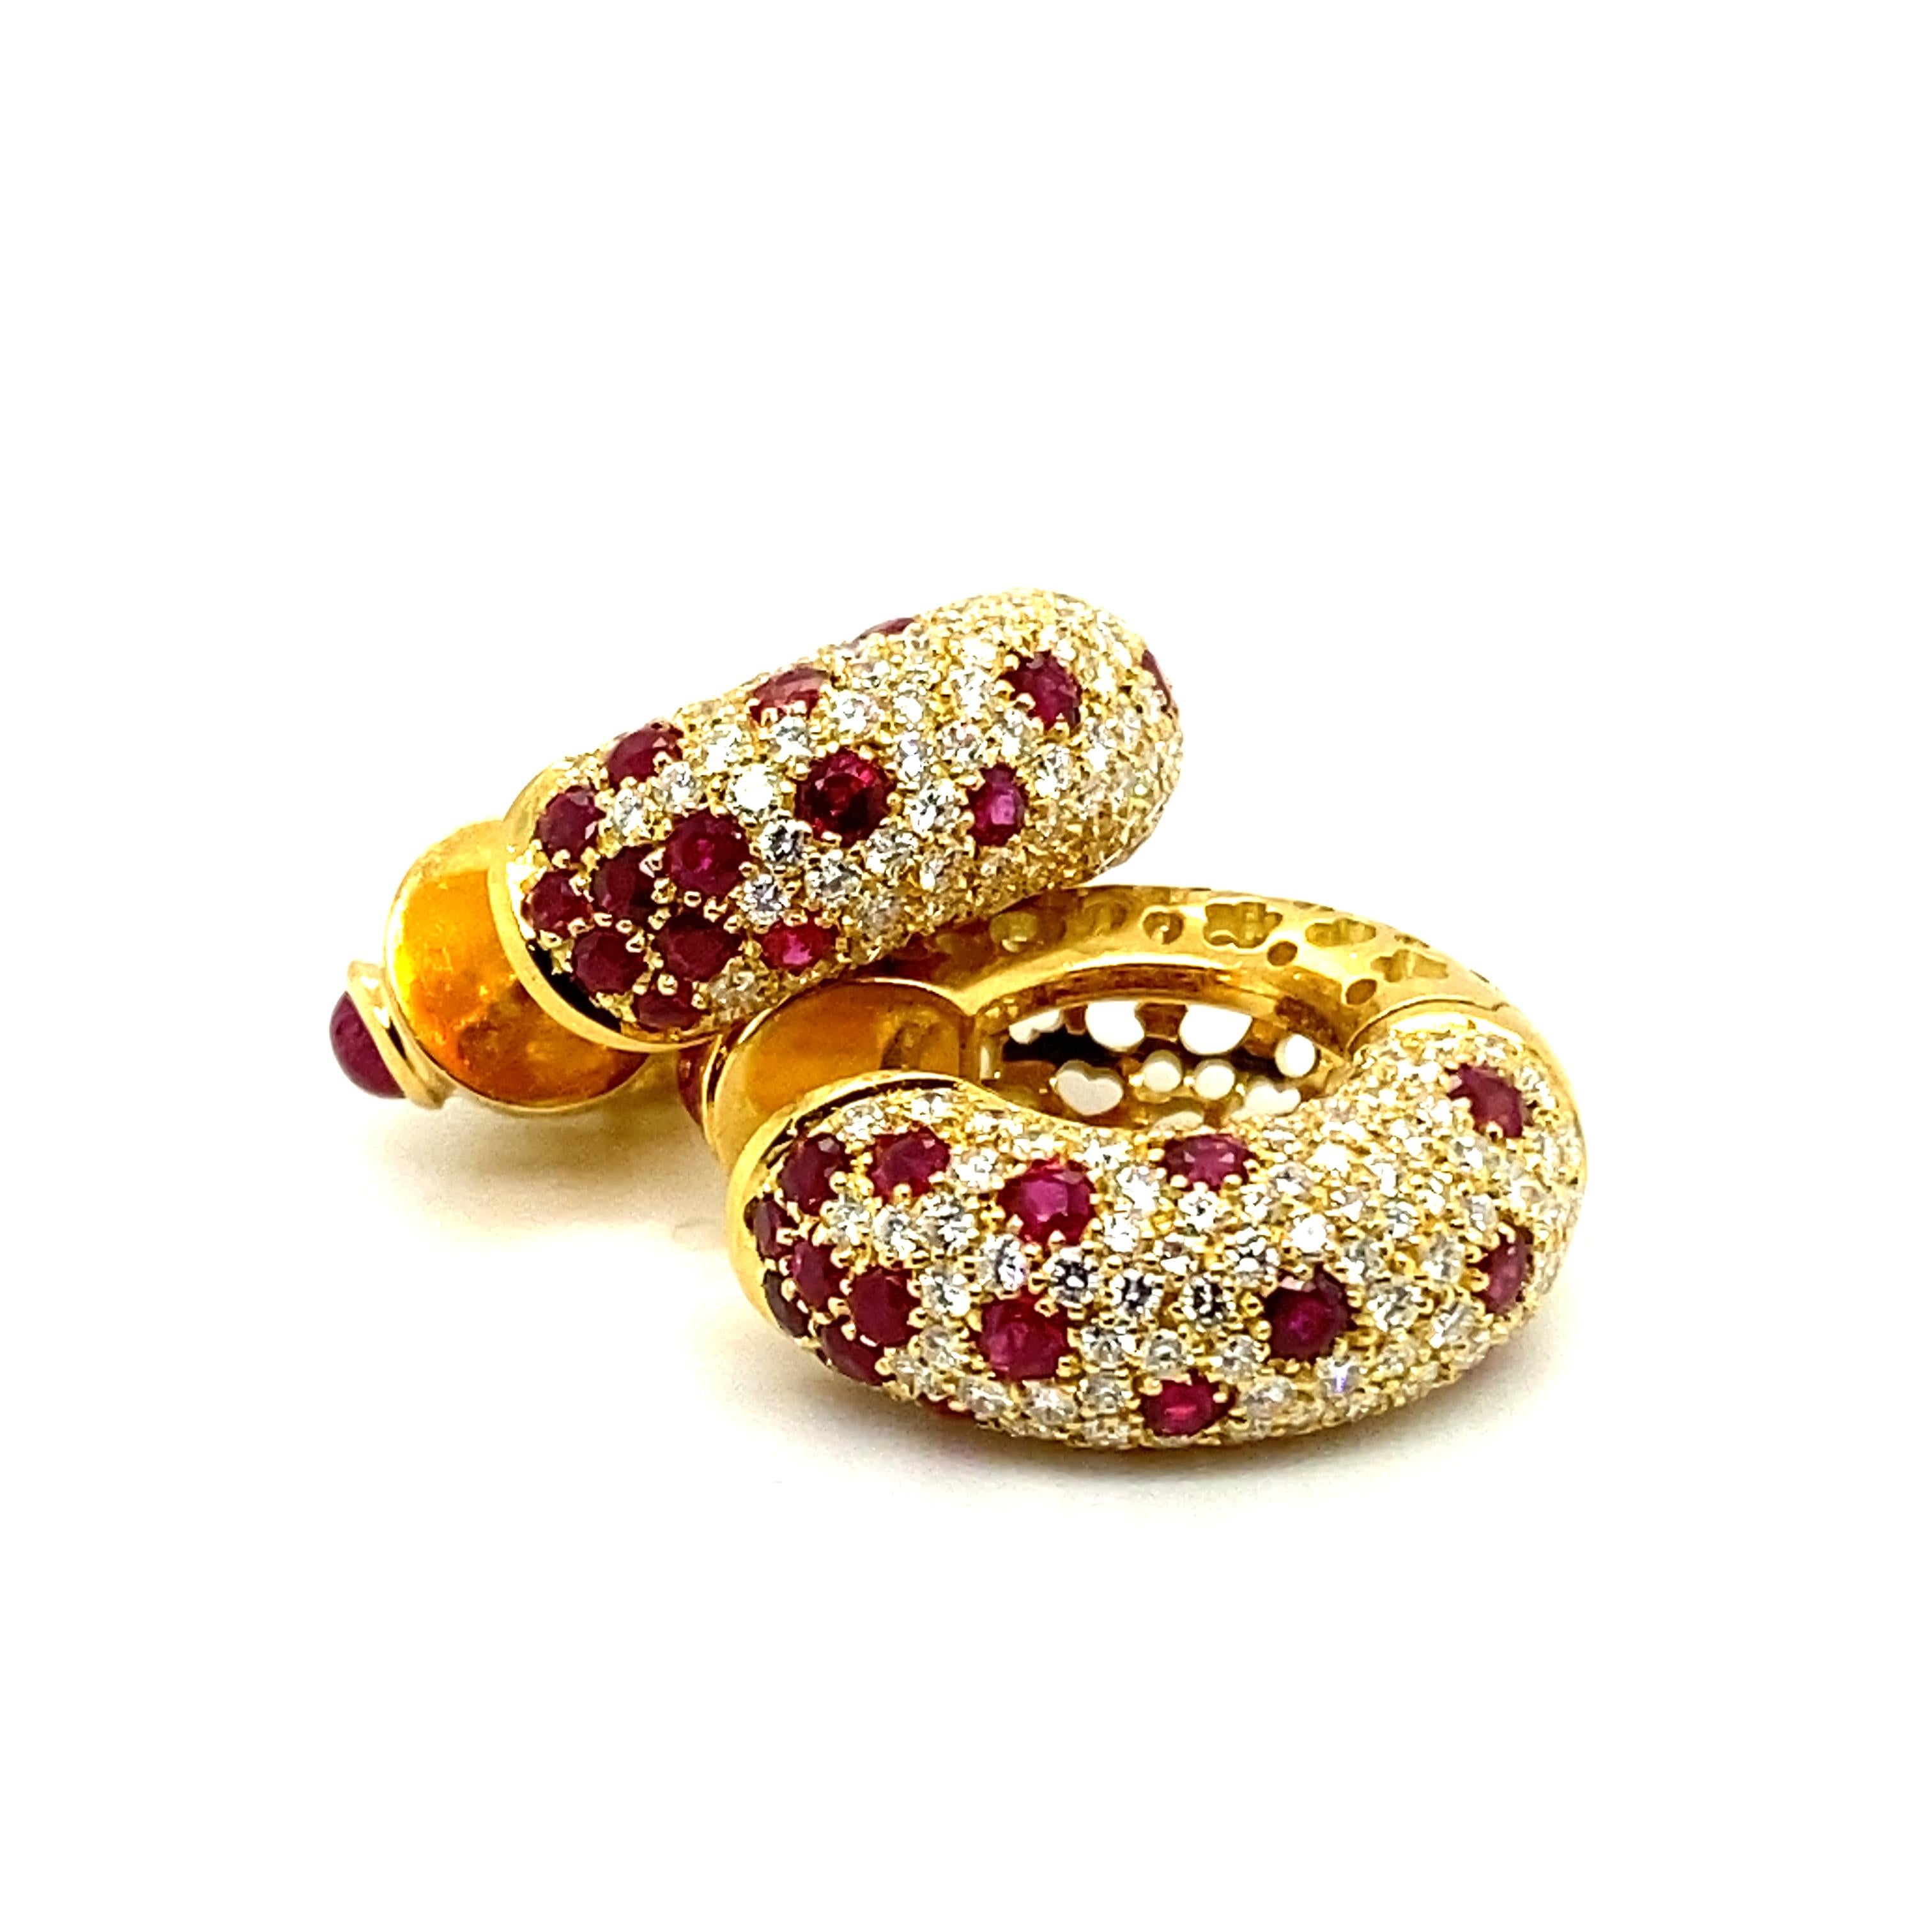 These charming hoop earrings in 18 karat yellow gold can be worn in two different ways.
One side is set with a sparkling diamond pavé of approximately 2.00 carats, accentuated by 36 round facetted, luminous rubies totalling approximately 1.80